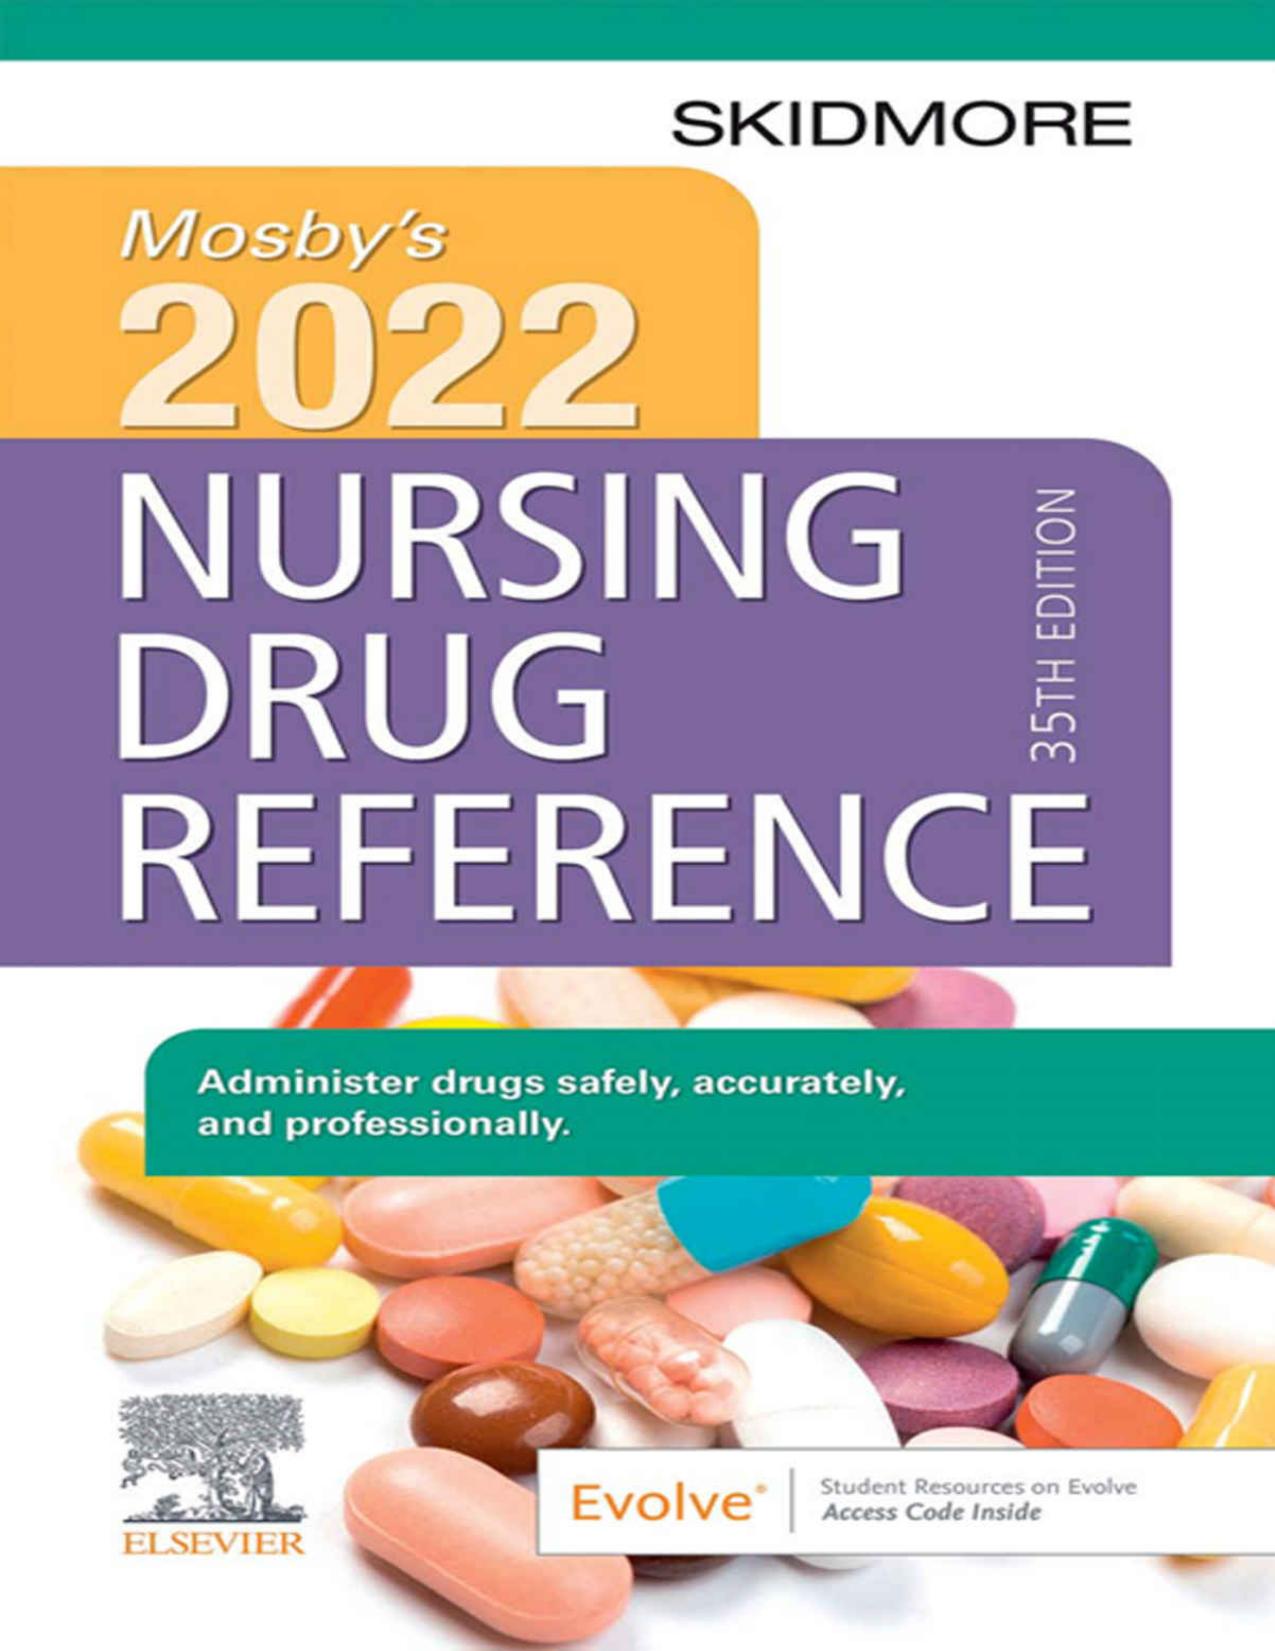 (eBook PDF)Mosby's 2022 Nursing Drug Reference - E-Book (ISSN) 35th Edition by Linda Skidmore-Roth RN  MSN  NP